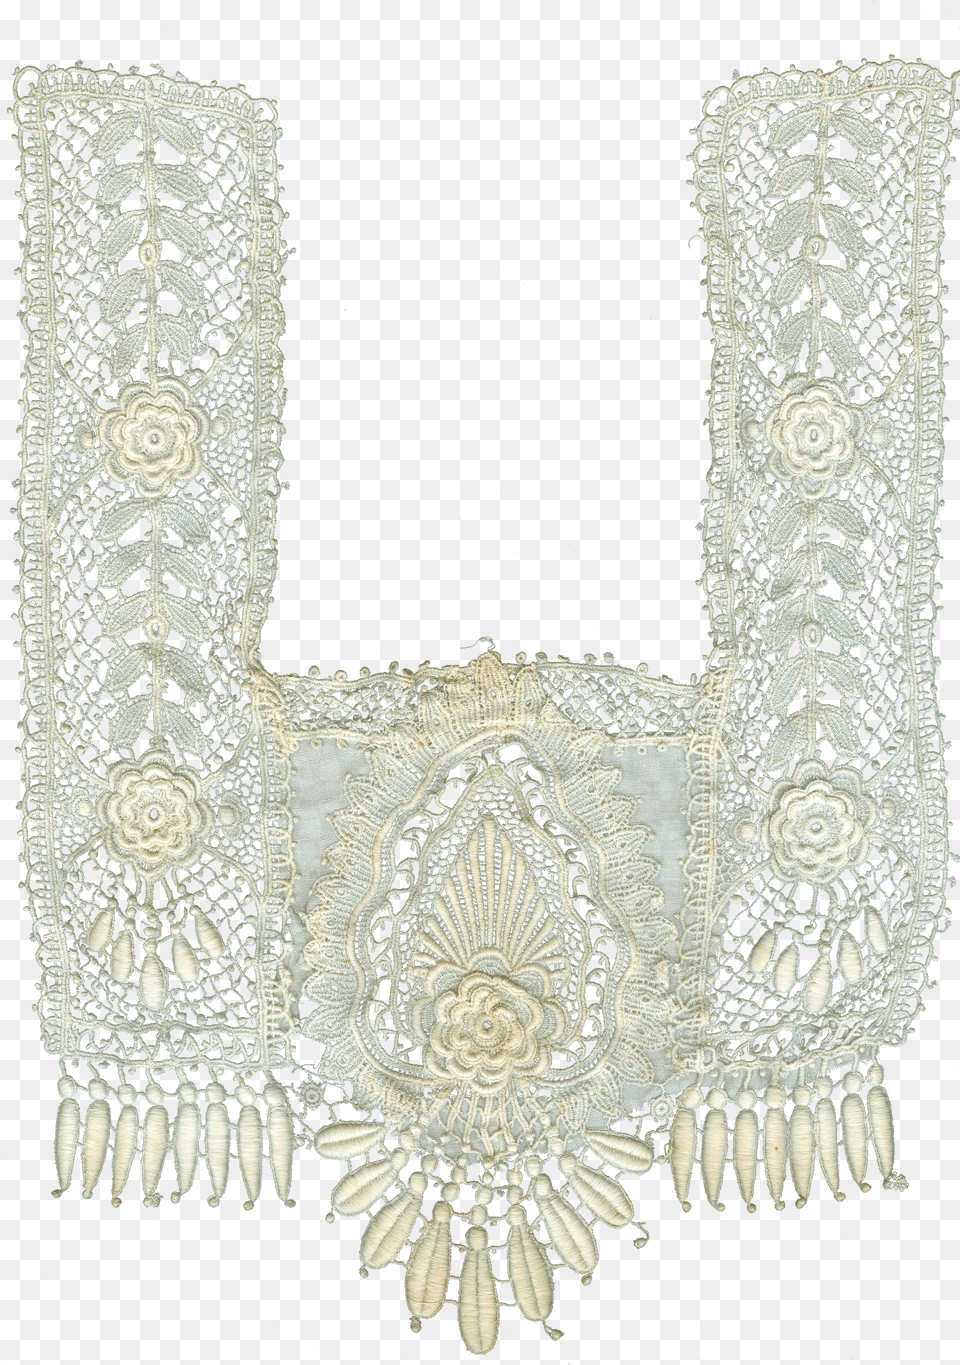 Lace Texture Png Image